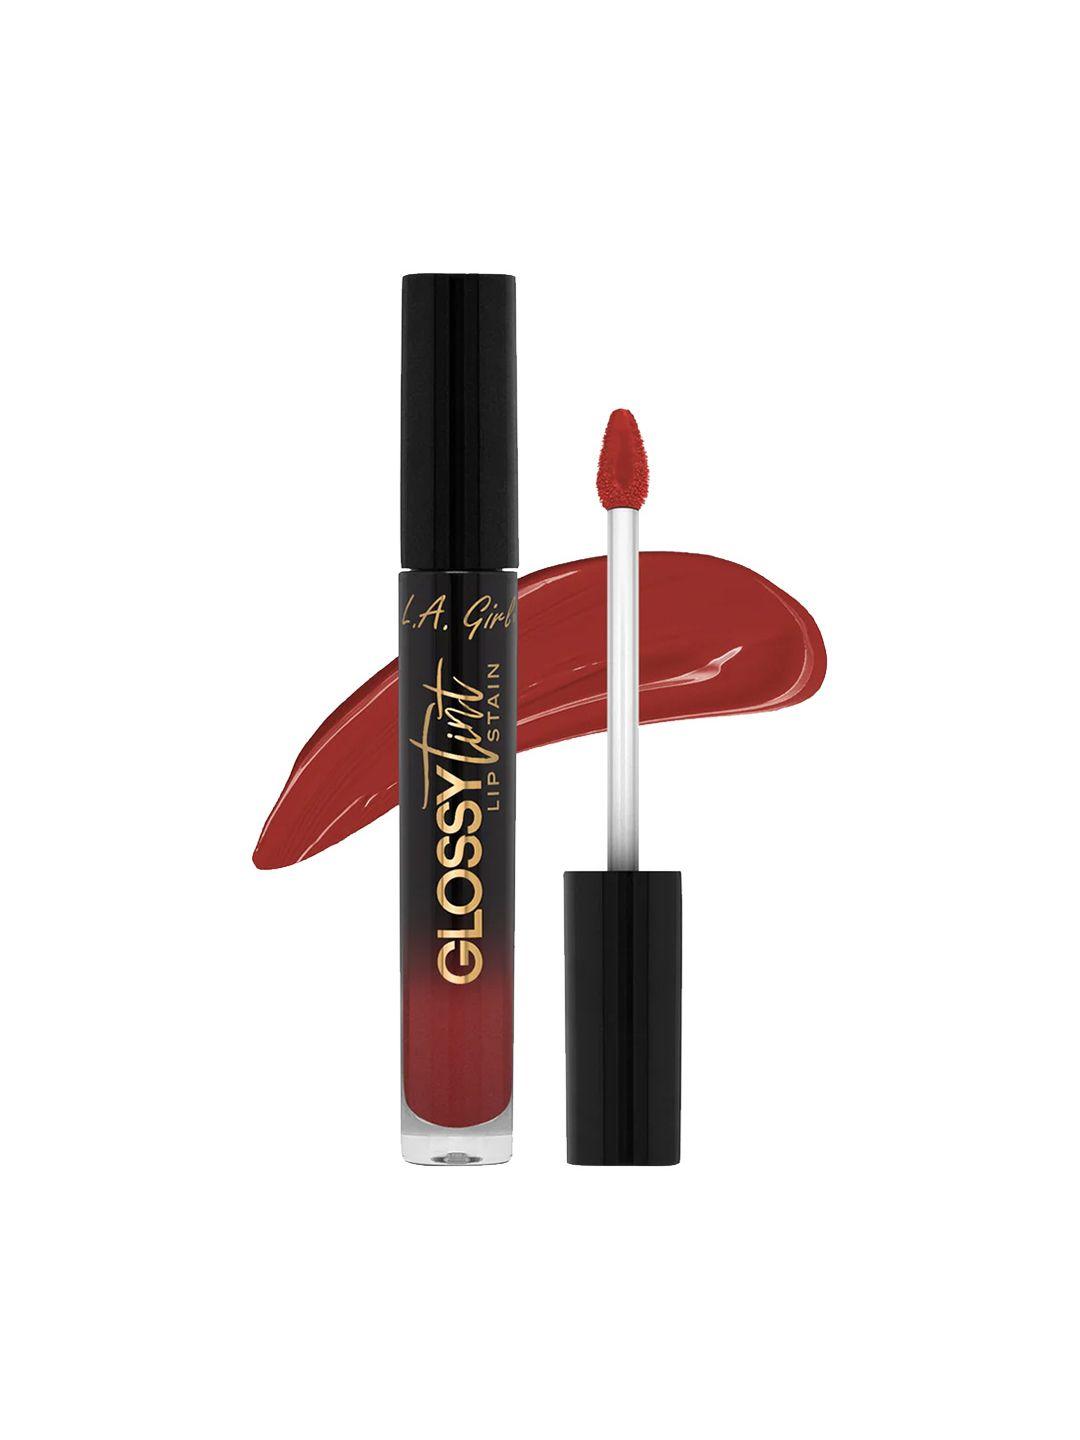 l.a girl glossy tint high-pigmented non-drying long-lasting lip stain 2.9g - adored